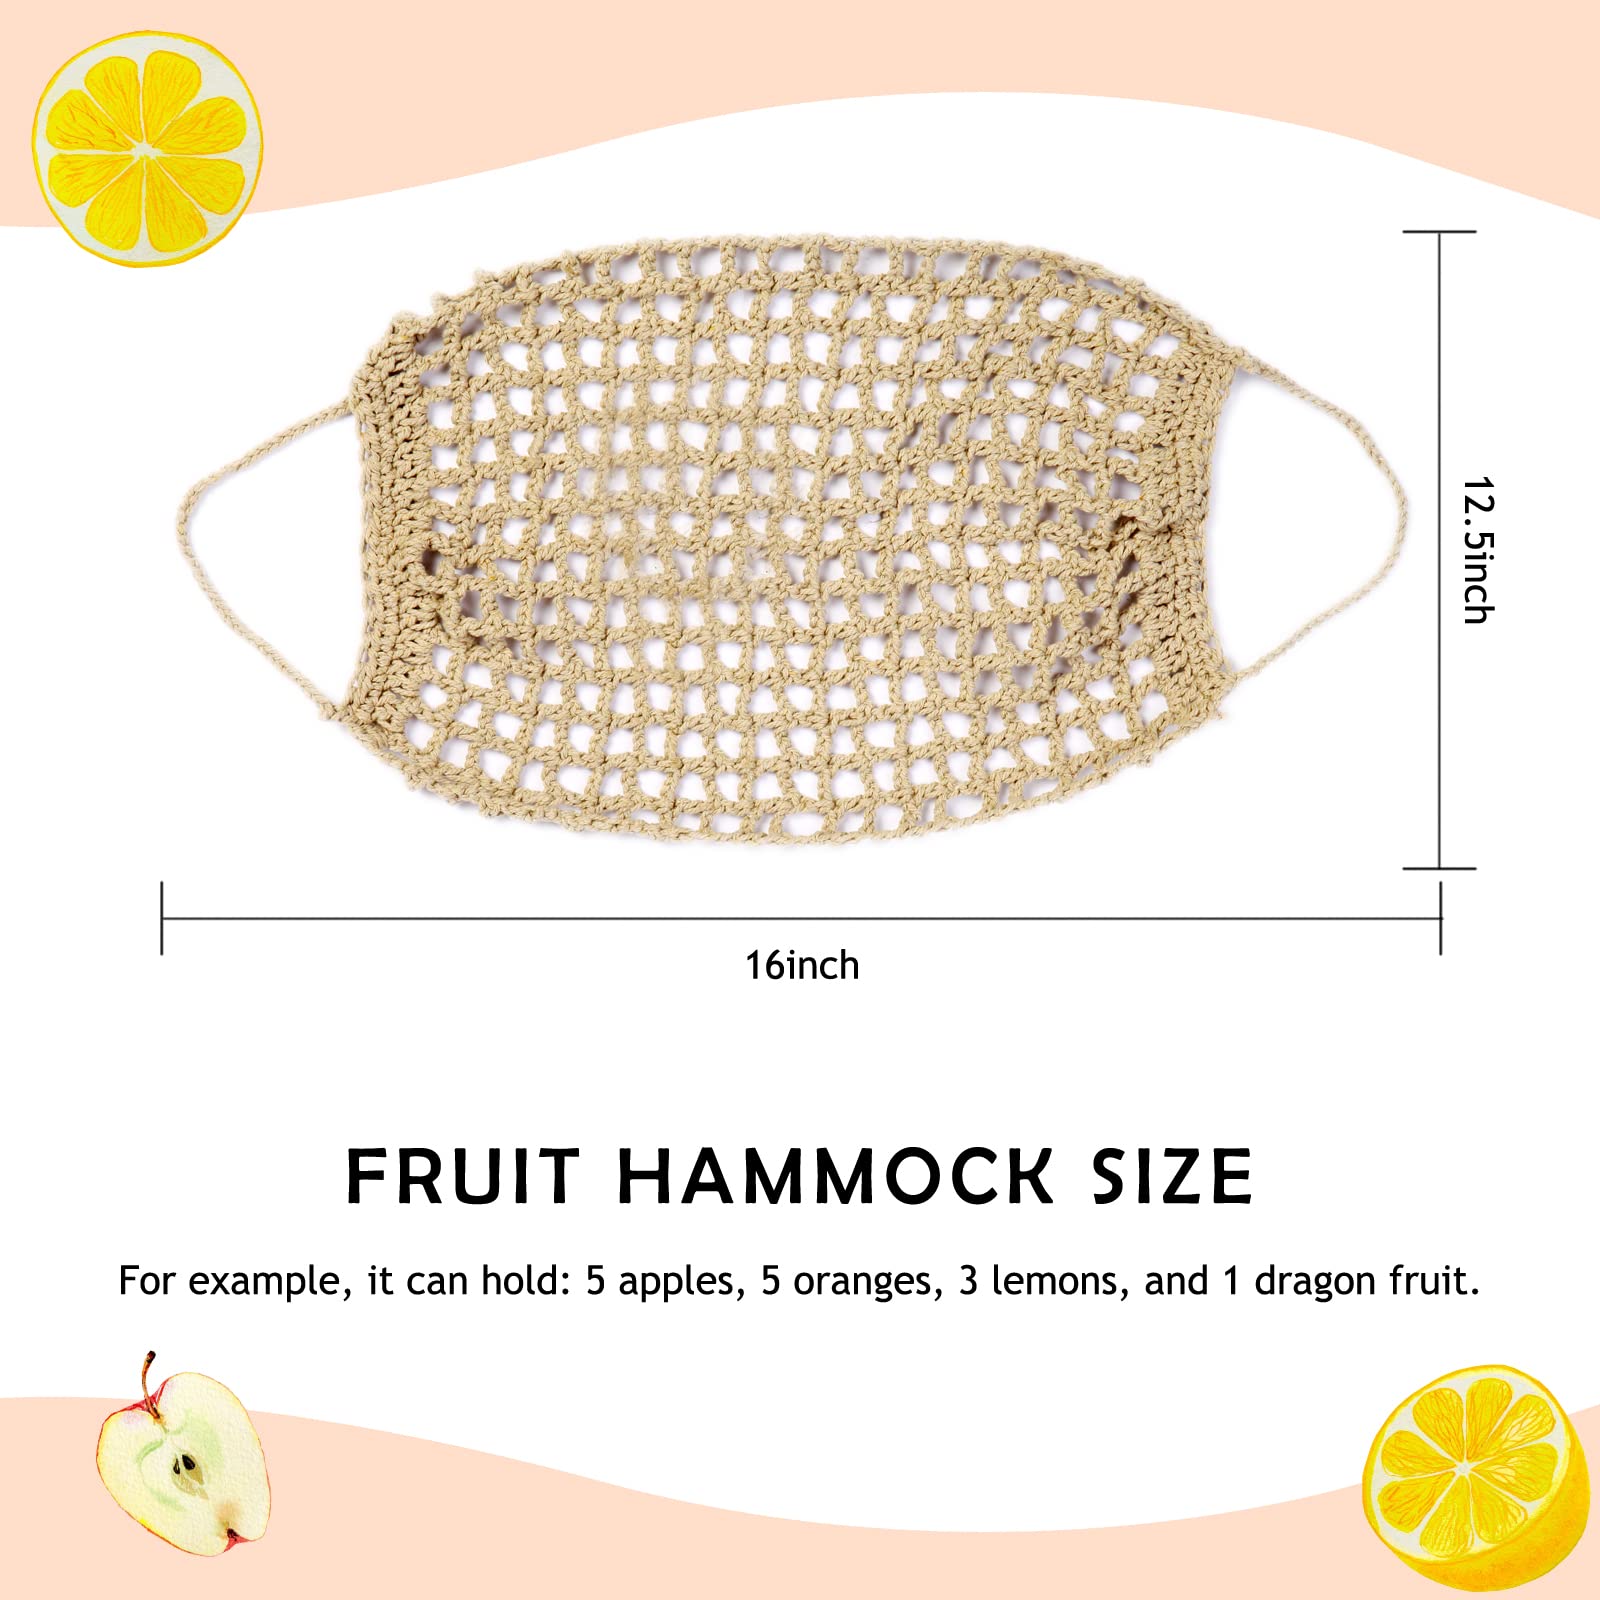 Fruit Hammock for Kitchen Under Cabinet - Large Macrame Fruit Hammock for Kitchen Décor - Storage That Saves Counter For More Counter Space at Home, Boat, or Rv,with 4 Hooks.(nature)